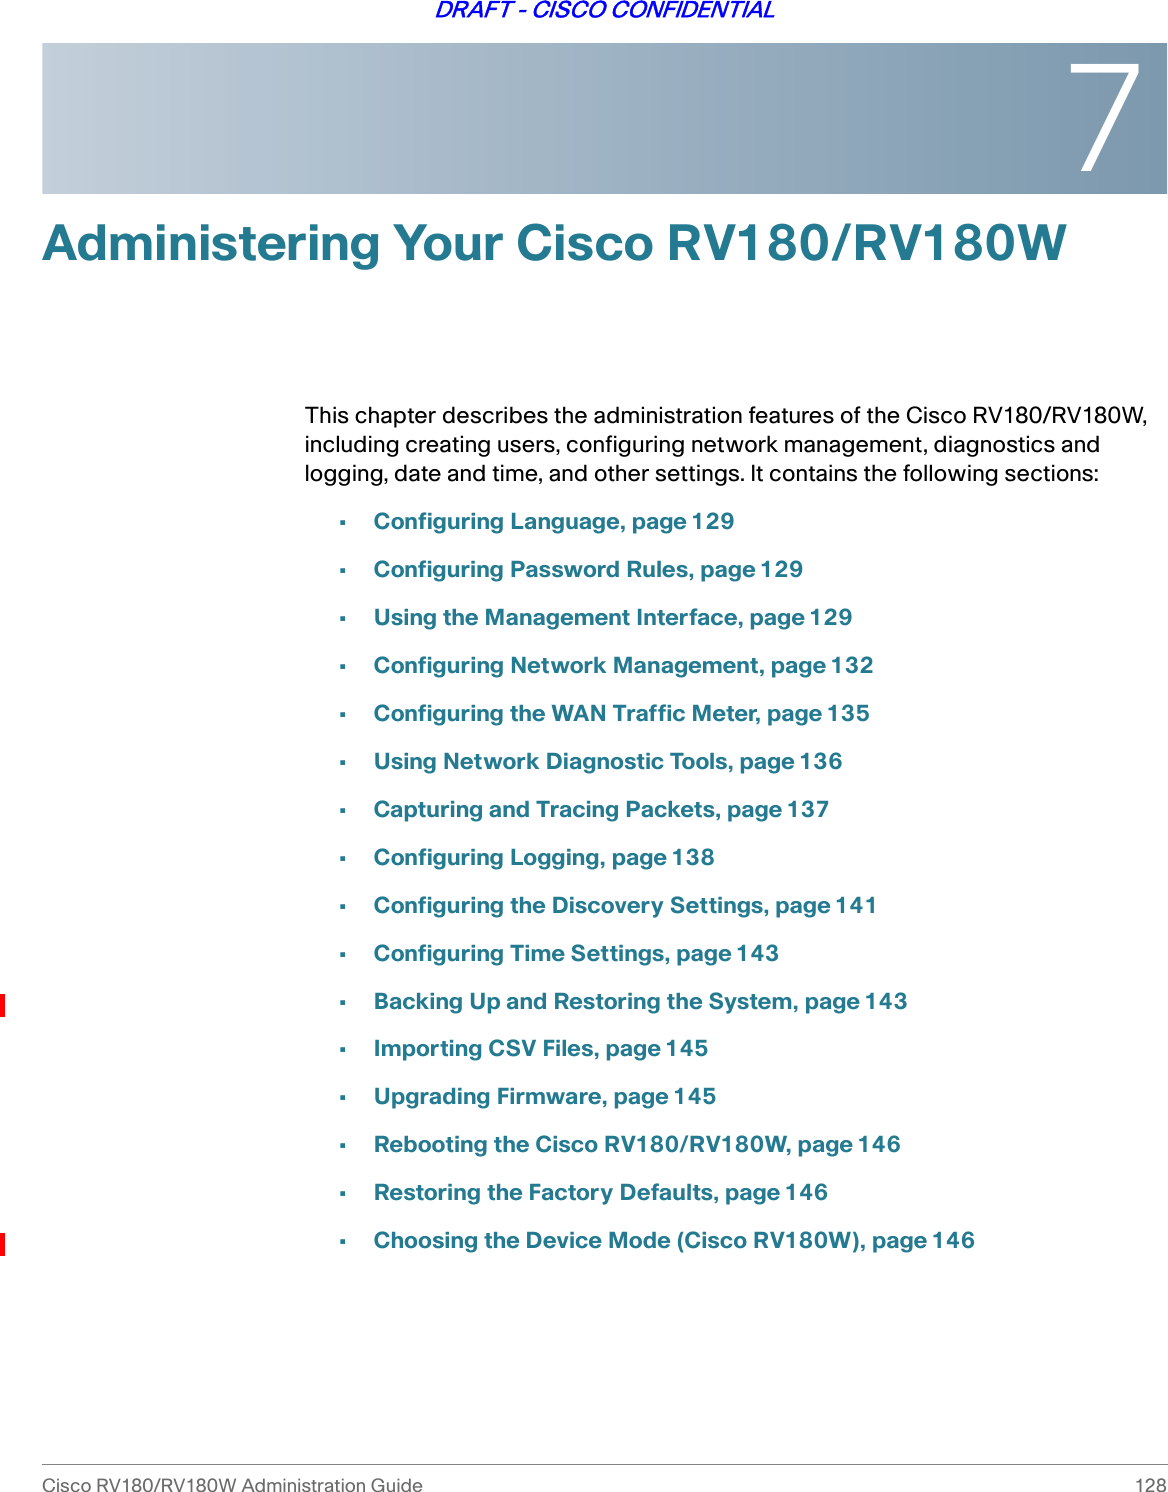 7Cisco RV180/RV180W Administration Guide 128DRAFT - CISCO CONFIDENTIALAdministering Your Cisco RV180/RV180WThis chapter describes the administration features of the Cisco RV180/RV180W, including creating users, configuring network management, diagnostics and logging, date and time, and other settings. It contains the following sections:•Configuring Language, page 129•Configuring Password Rules, page 129•Using the Management Interface, page 129•Configuring Network Management, page 132•Configuring the WAN Traffic Meter, page 135•Using Network Diagnostic Tools, page 136•Capturing and Tracing Packets, page 137•Configuring Logging, page 138•Configuring the Discovery Settings, page 141•Configuring Time Settings, page 143•Backing Up and Restoring the System, page 143•Importing CSV Files, page145•Upgrading Firmware, page 145•Rebooting the Cisco RV180/RV180W, page 146•Restoring the Factory Defaults, page 146•Choosing the Device Mode (Cisco RV180W), page 146